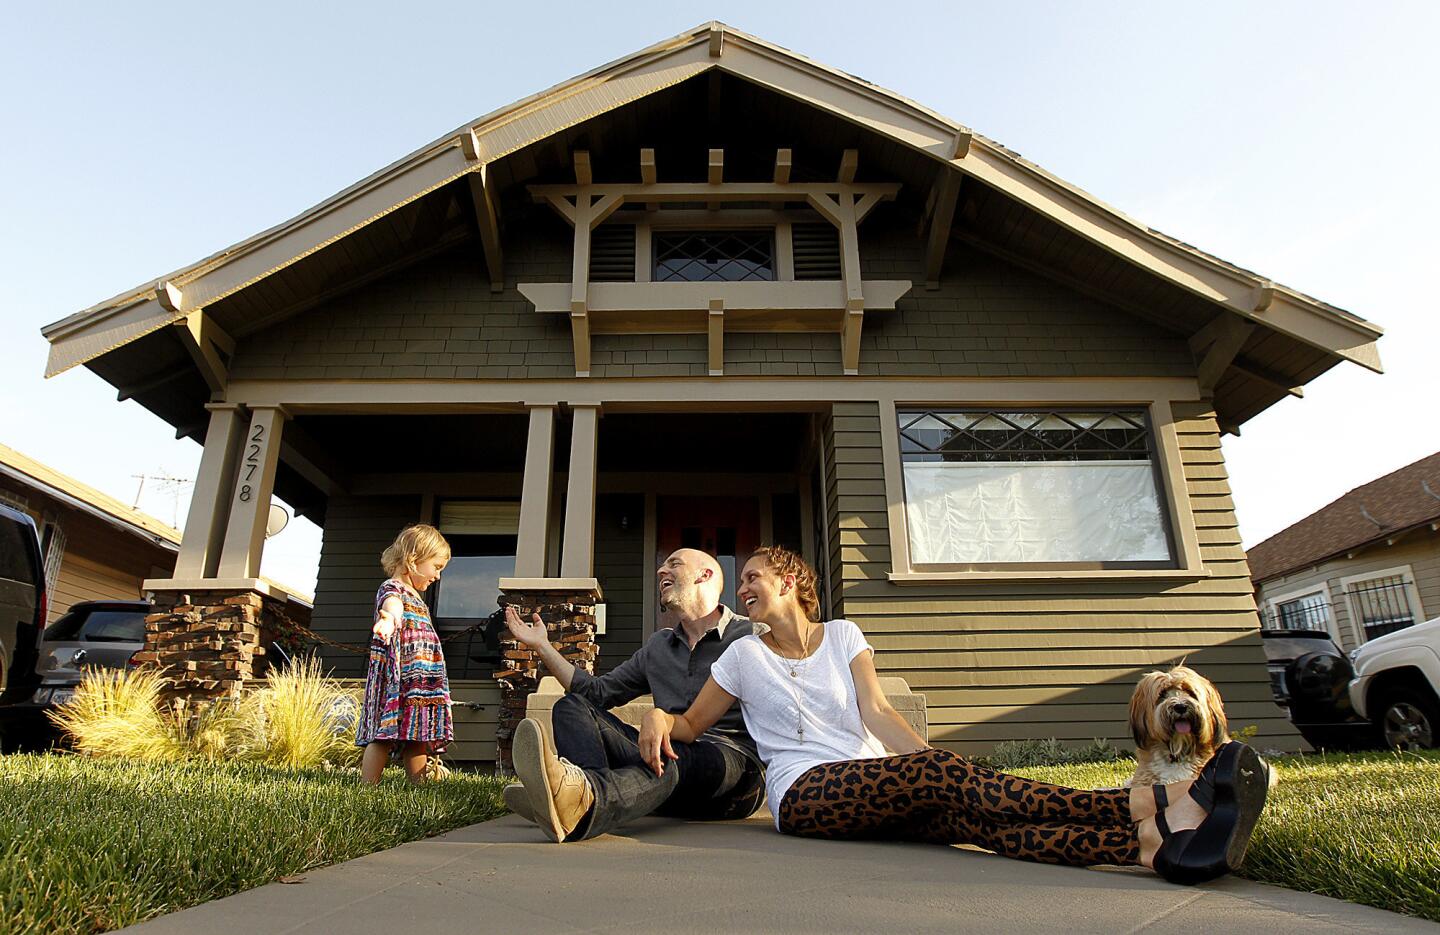 Mark and Jillian Dillon and their 1-year-old daughter, Staley Rae, and dog Guv'nor hang out in front of their home in Jefferson Park. The Dillons, who had been renting in Venice, purchased the rehabbed Craftsman home a year ago.